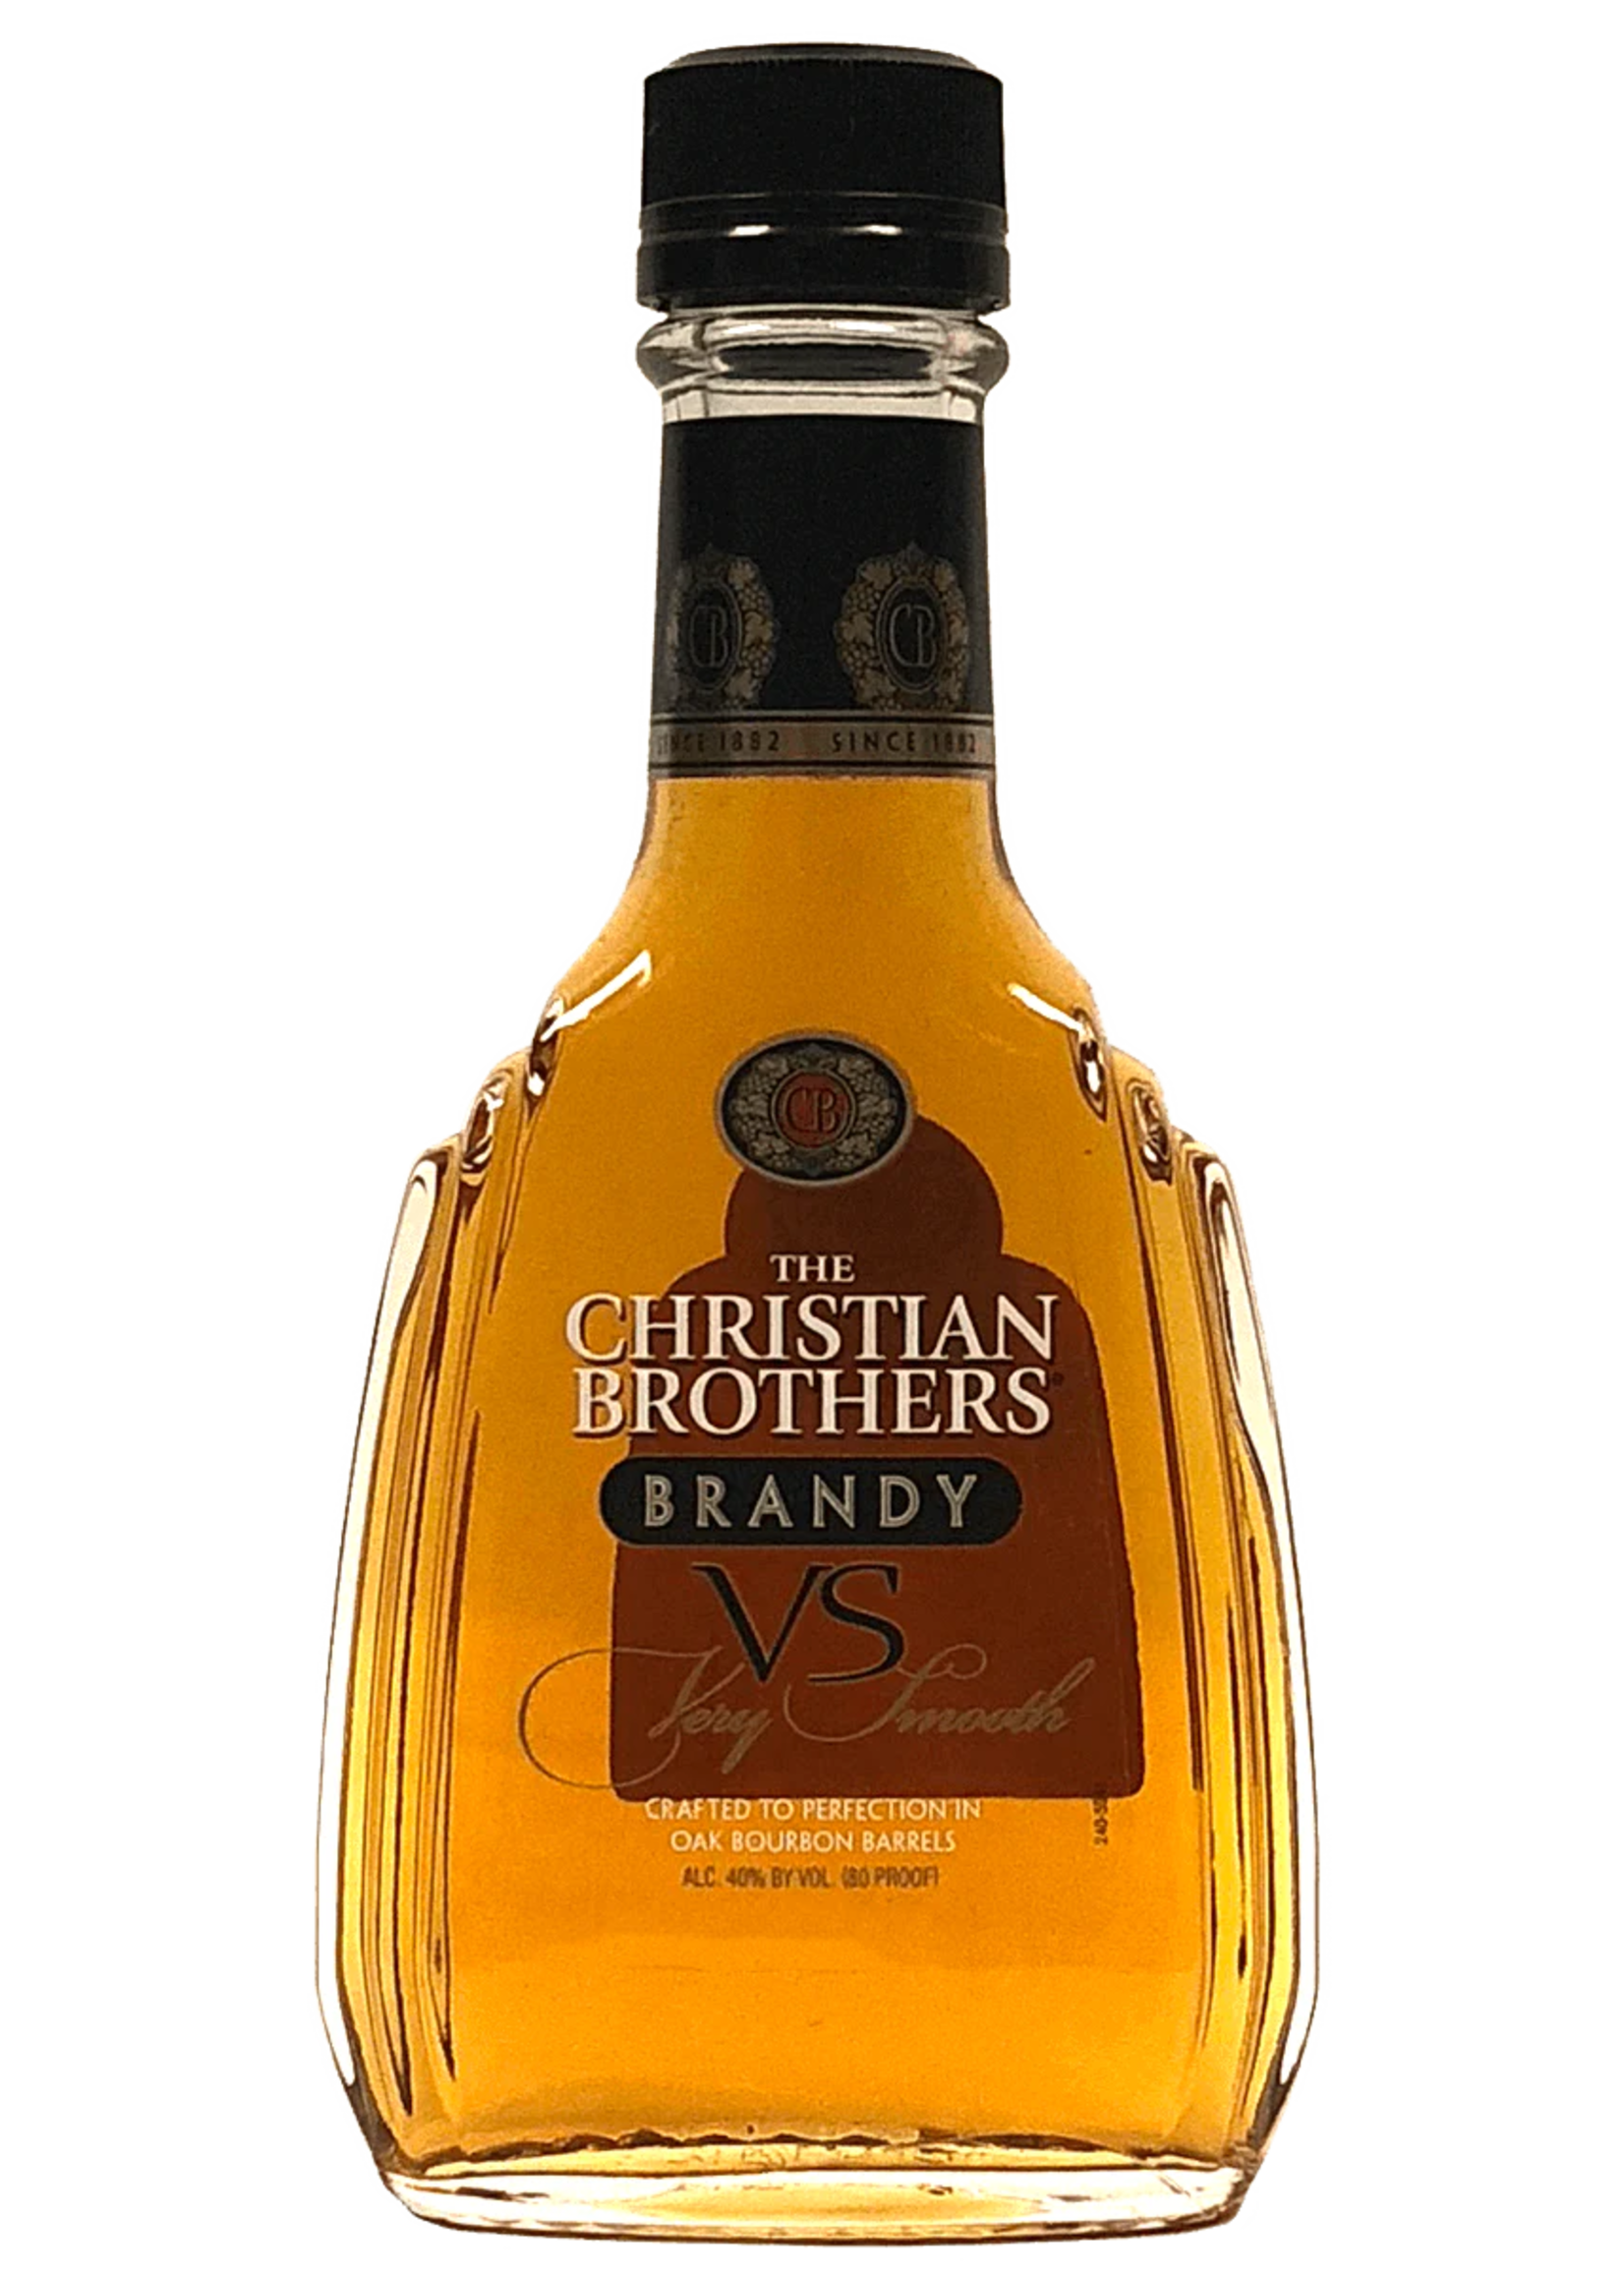 Christian Brothers Brandy 80Proof 1 Ltr